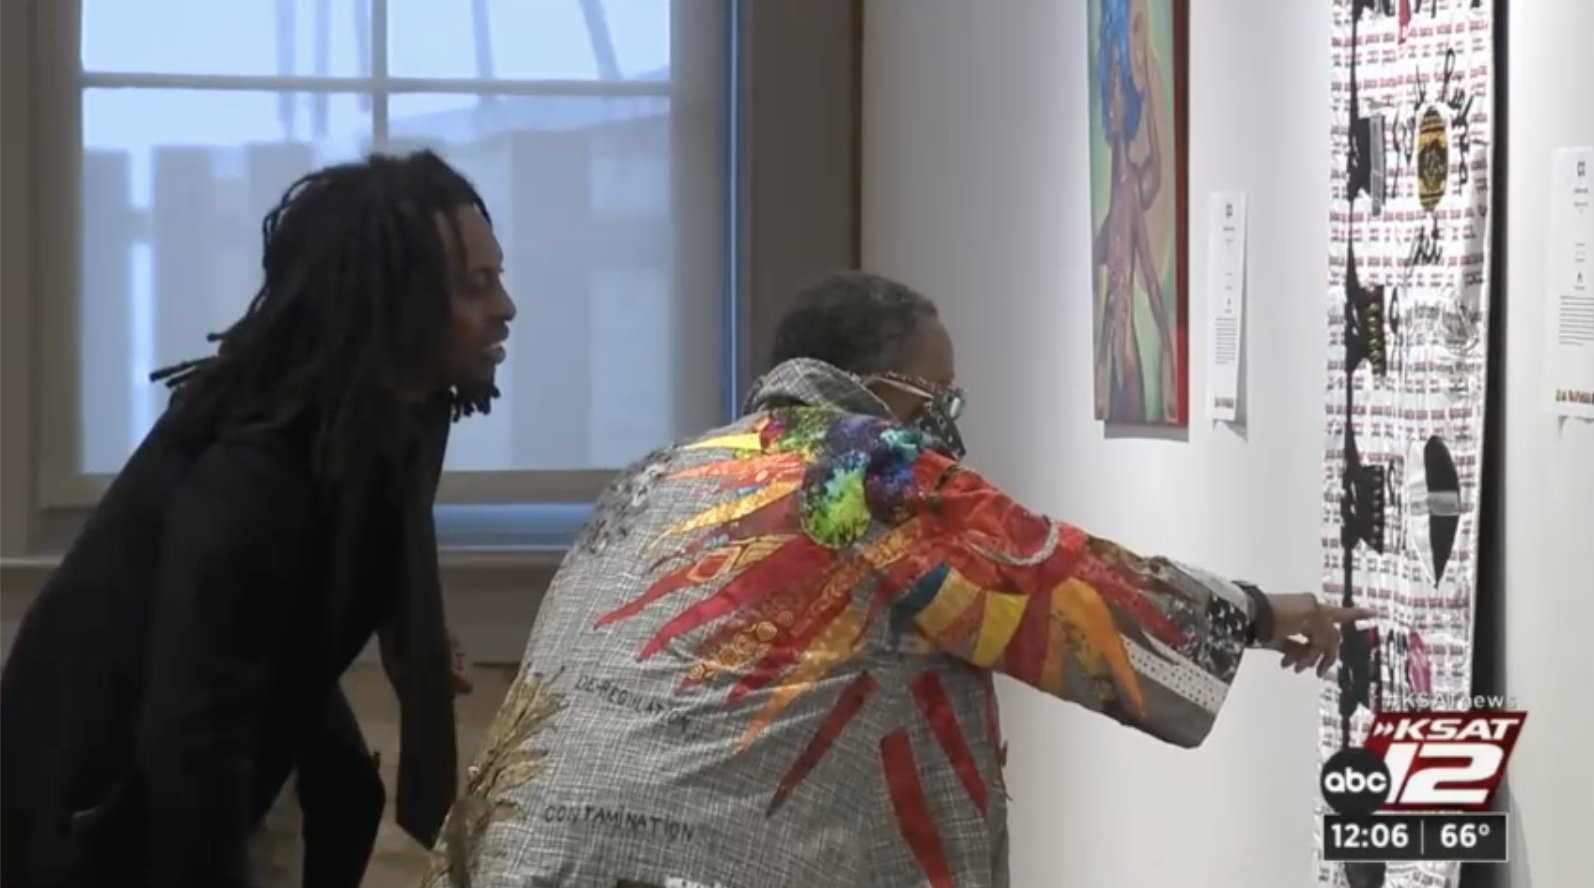 Black contemporary artists share culture, life experiences at new art exhibit in downtown San Antonio